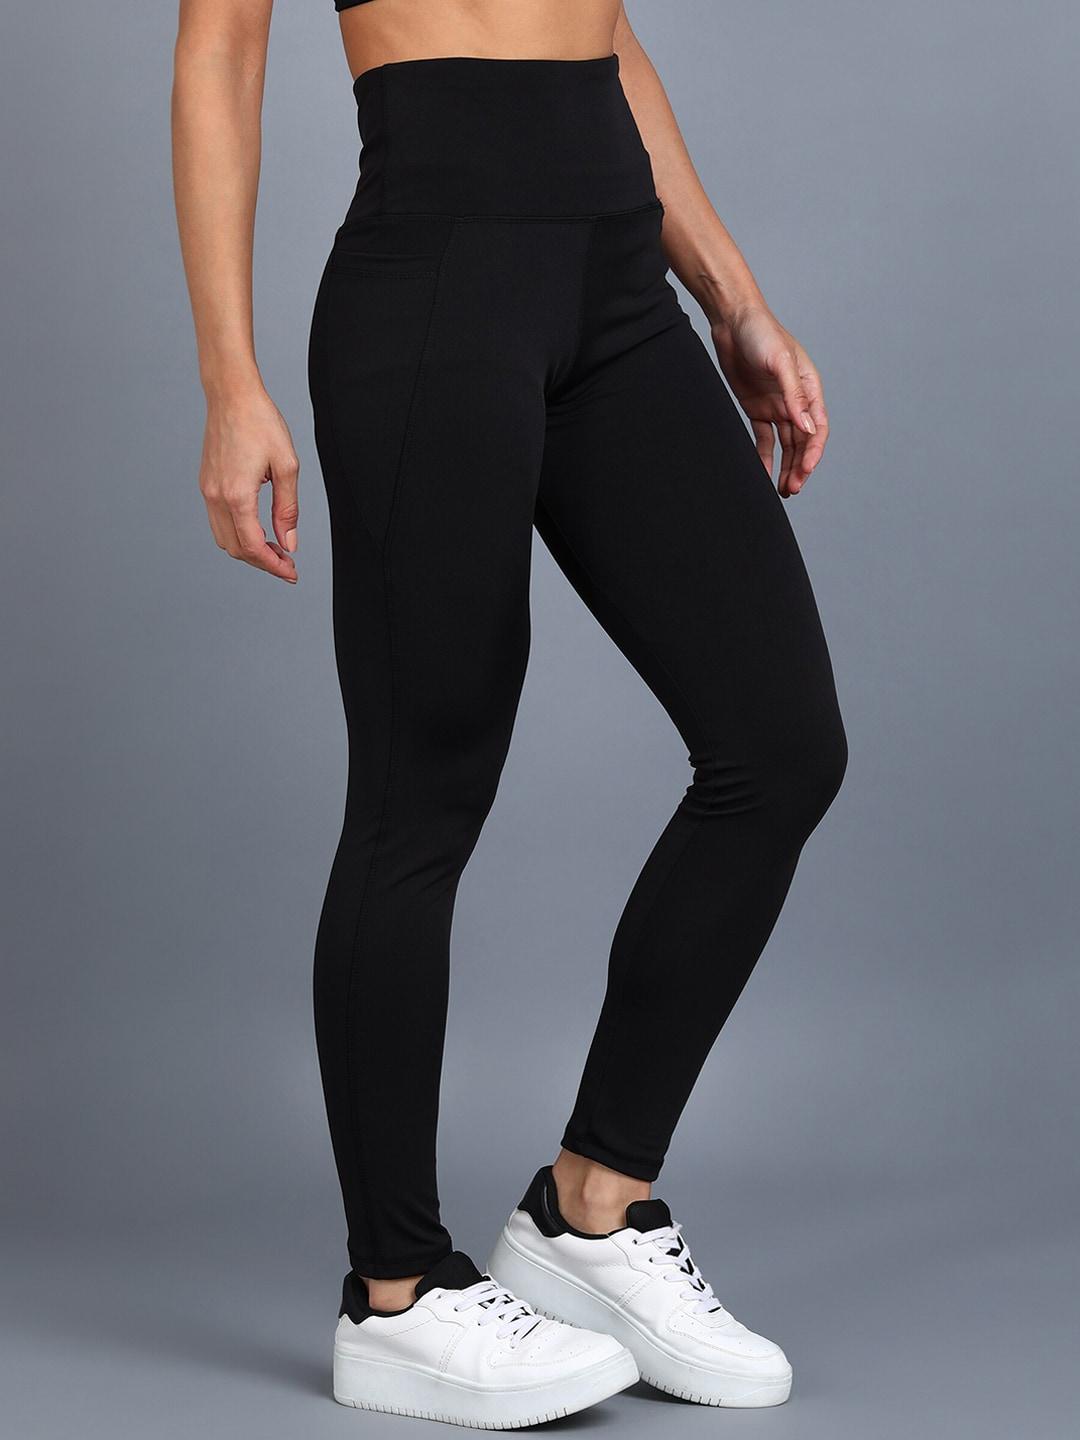 Rock Paper Scissors Women Black Solid Ankle Length Training Tights